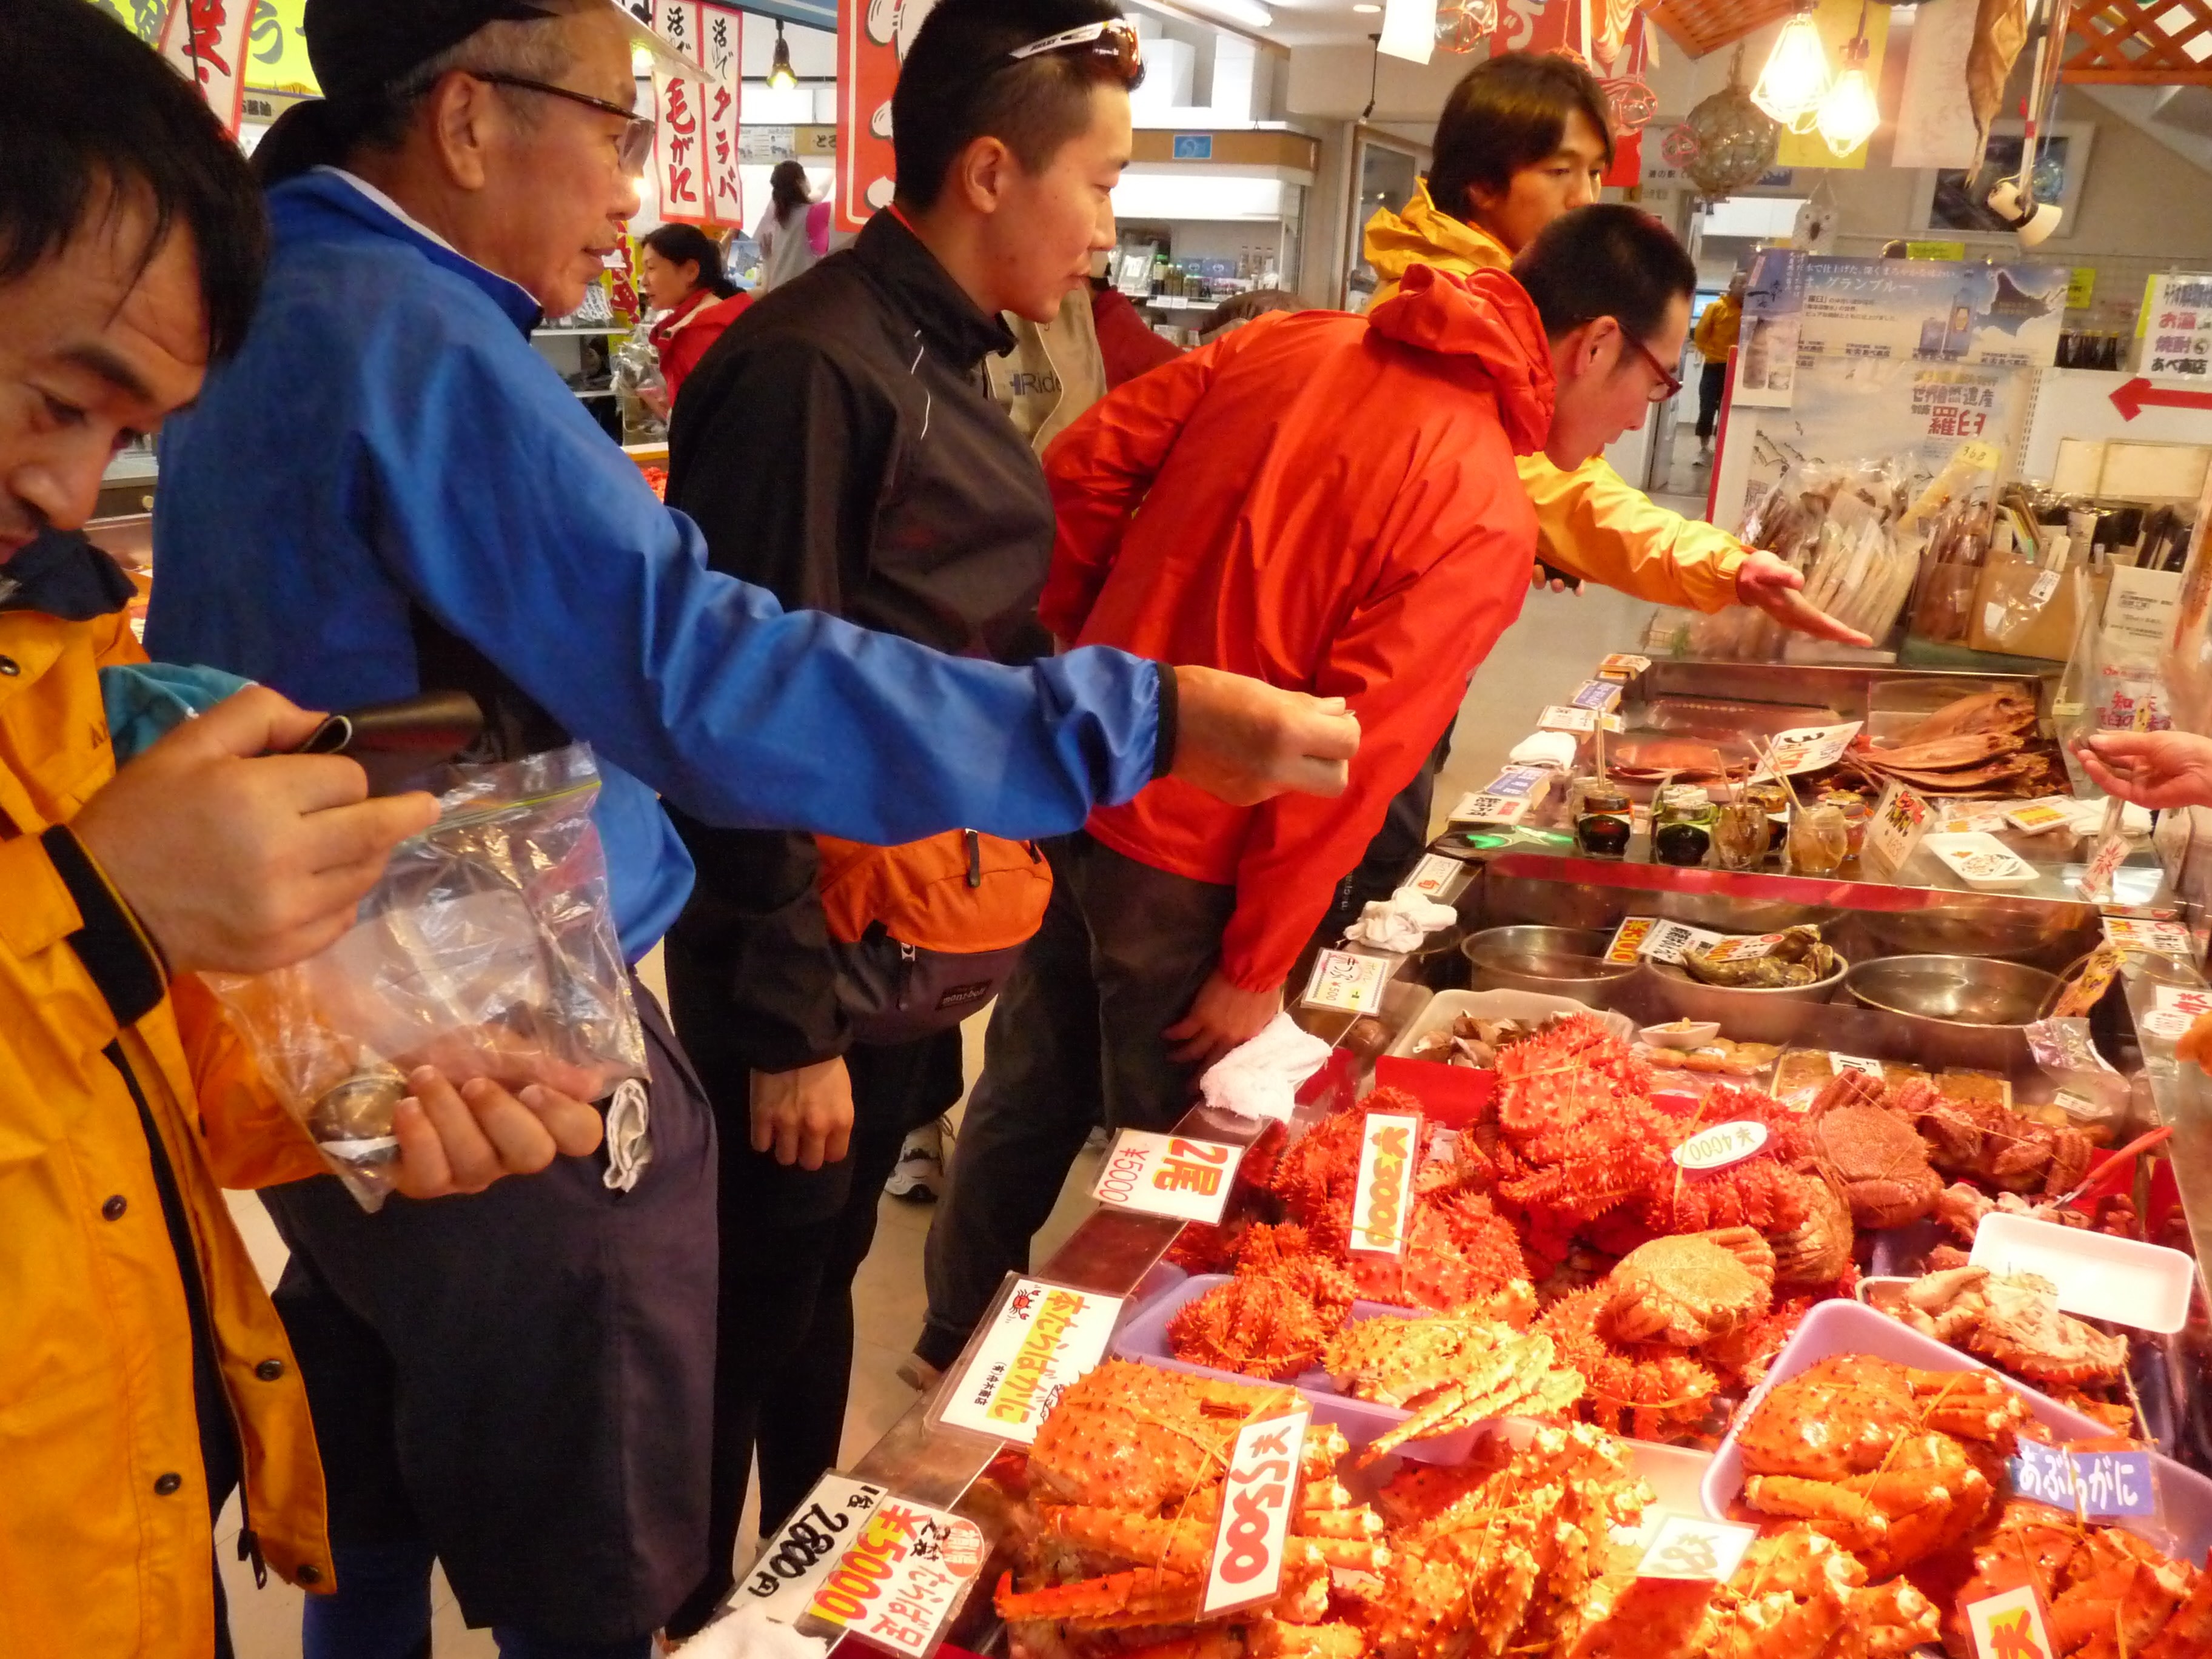 Patrons observe offerings at a seafood market in Rausu.